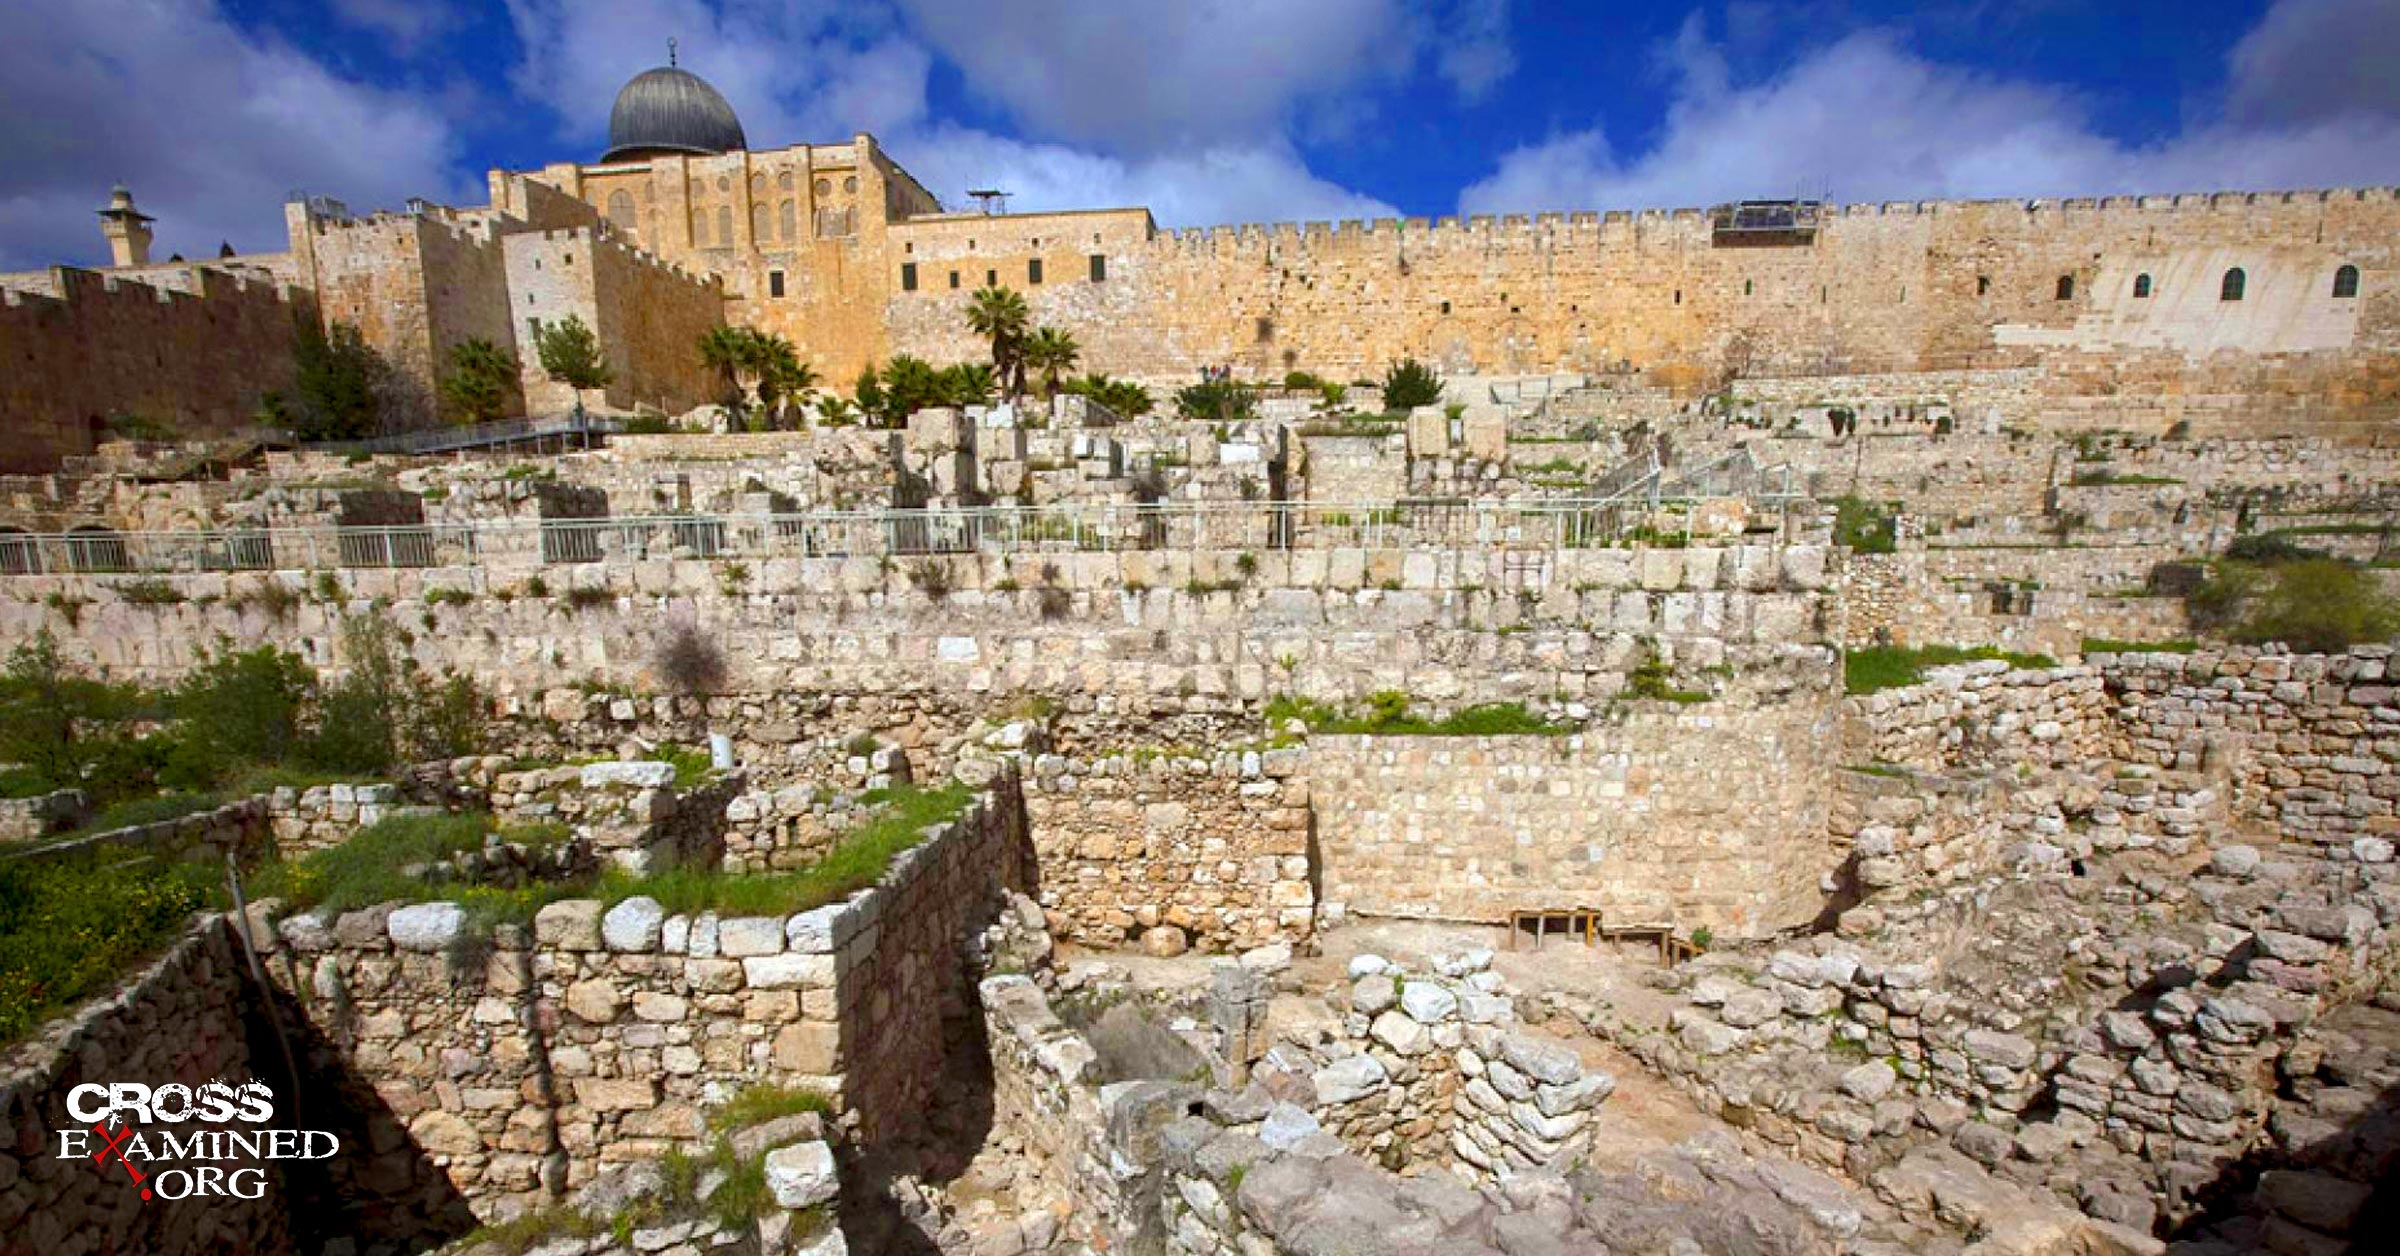 In ancient wall, scholar sees proof for Bible